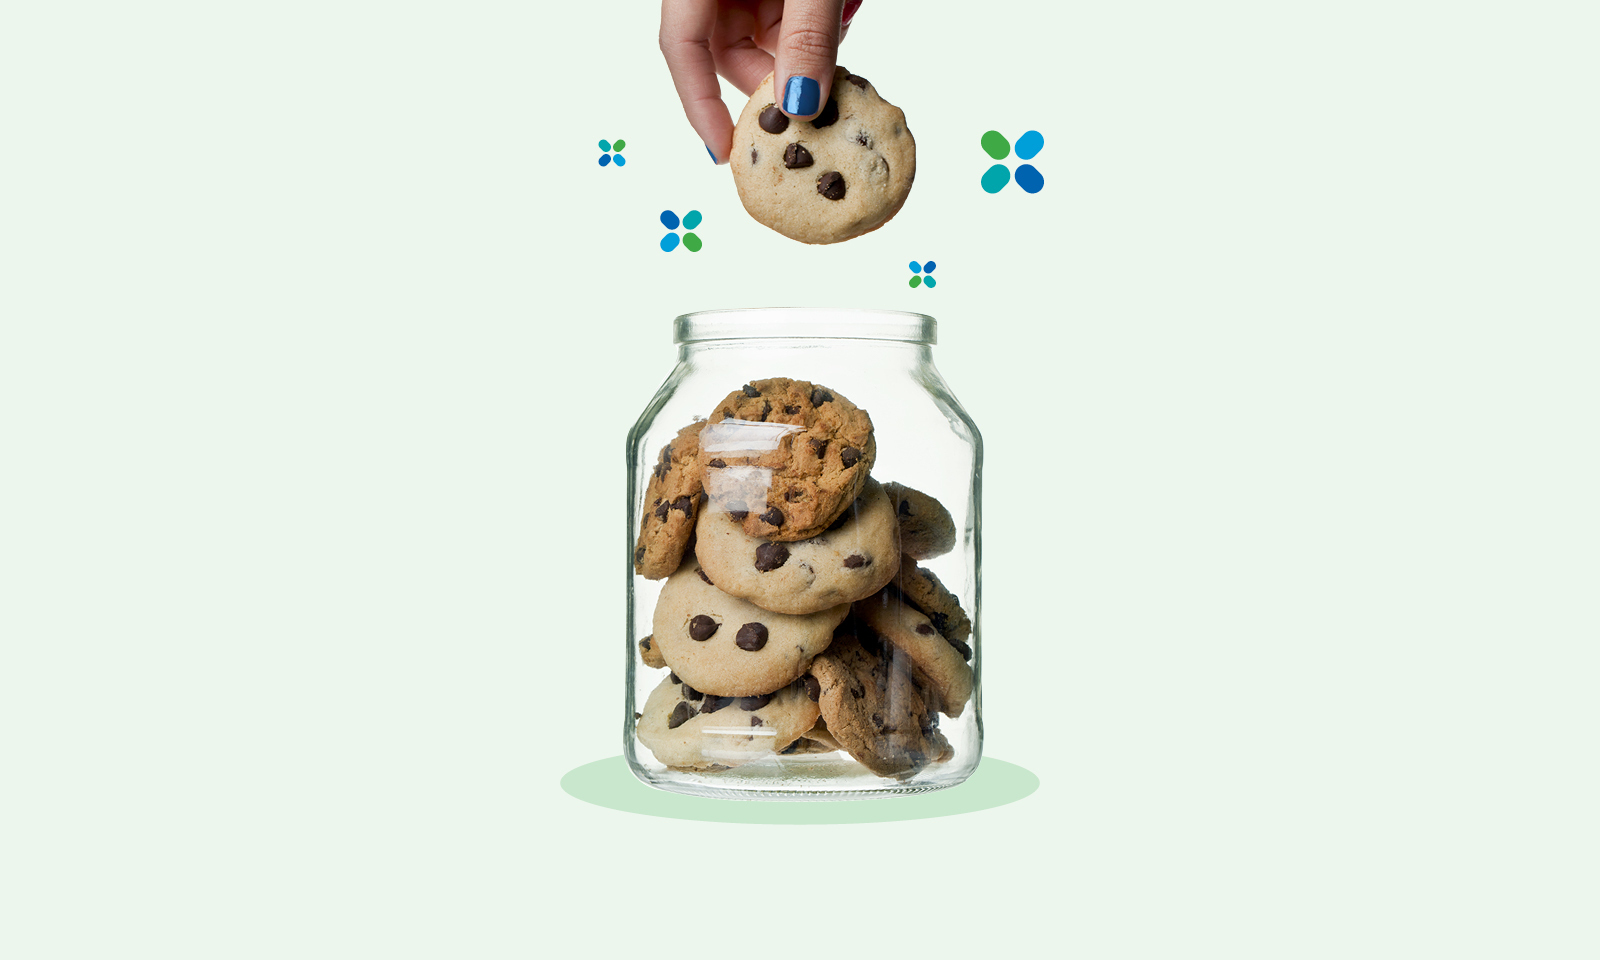 A hand taking a cookie from a cookie jar, a metaphor for accessing your super when you're retired